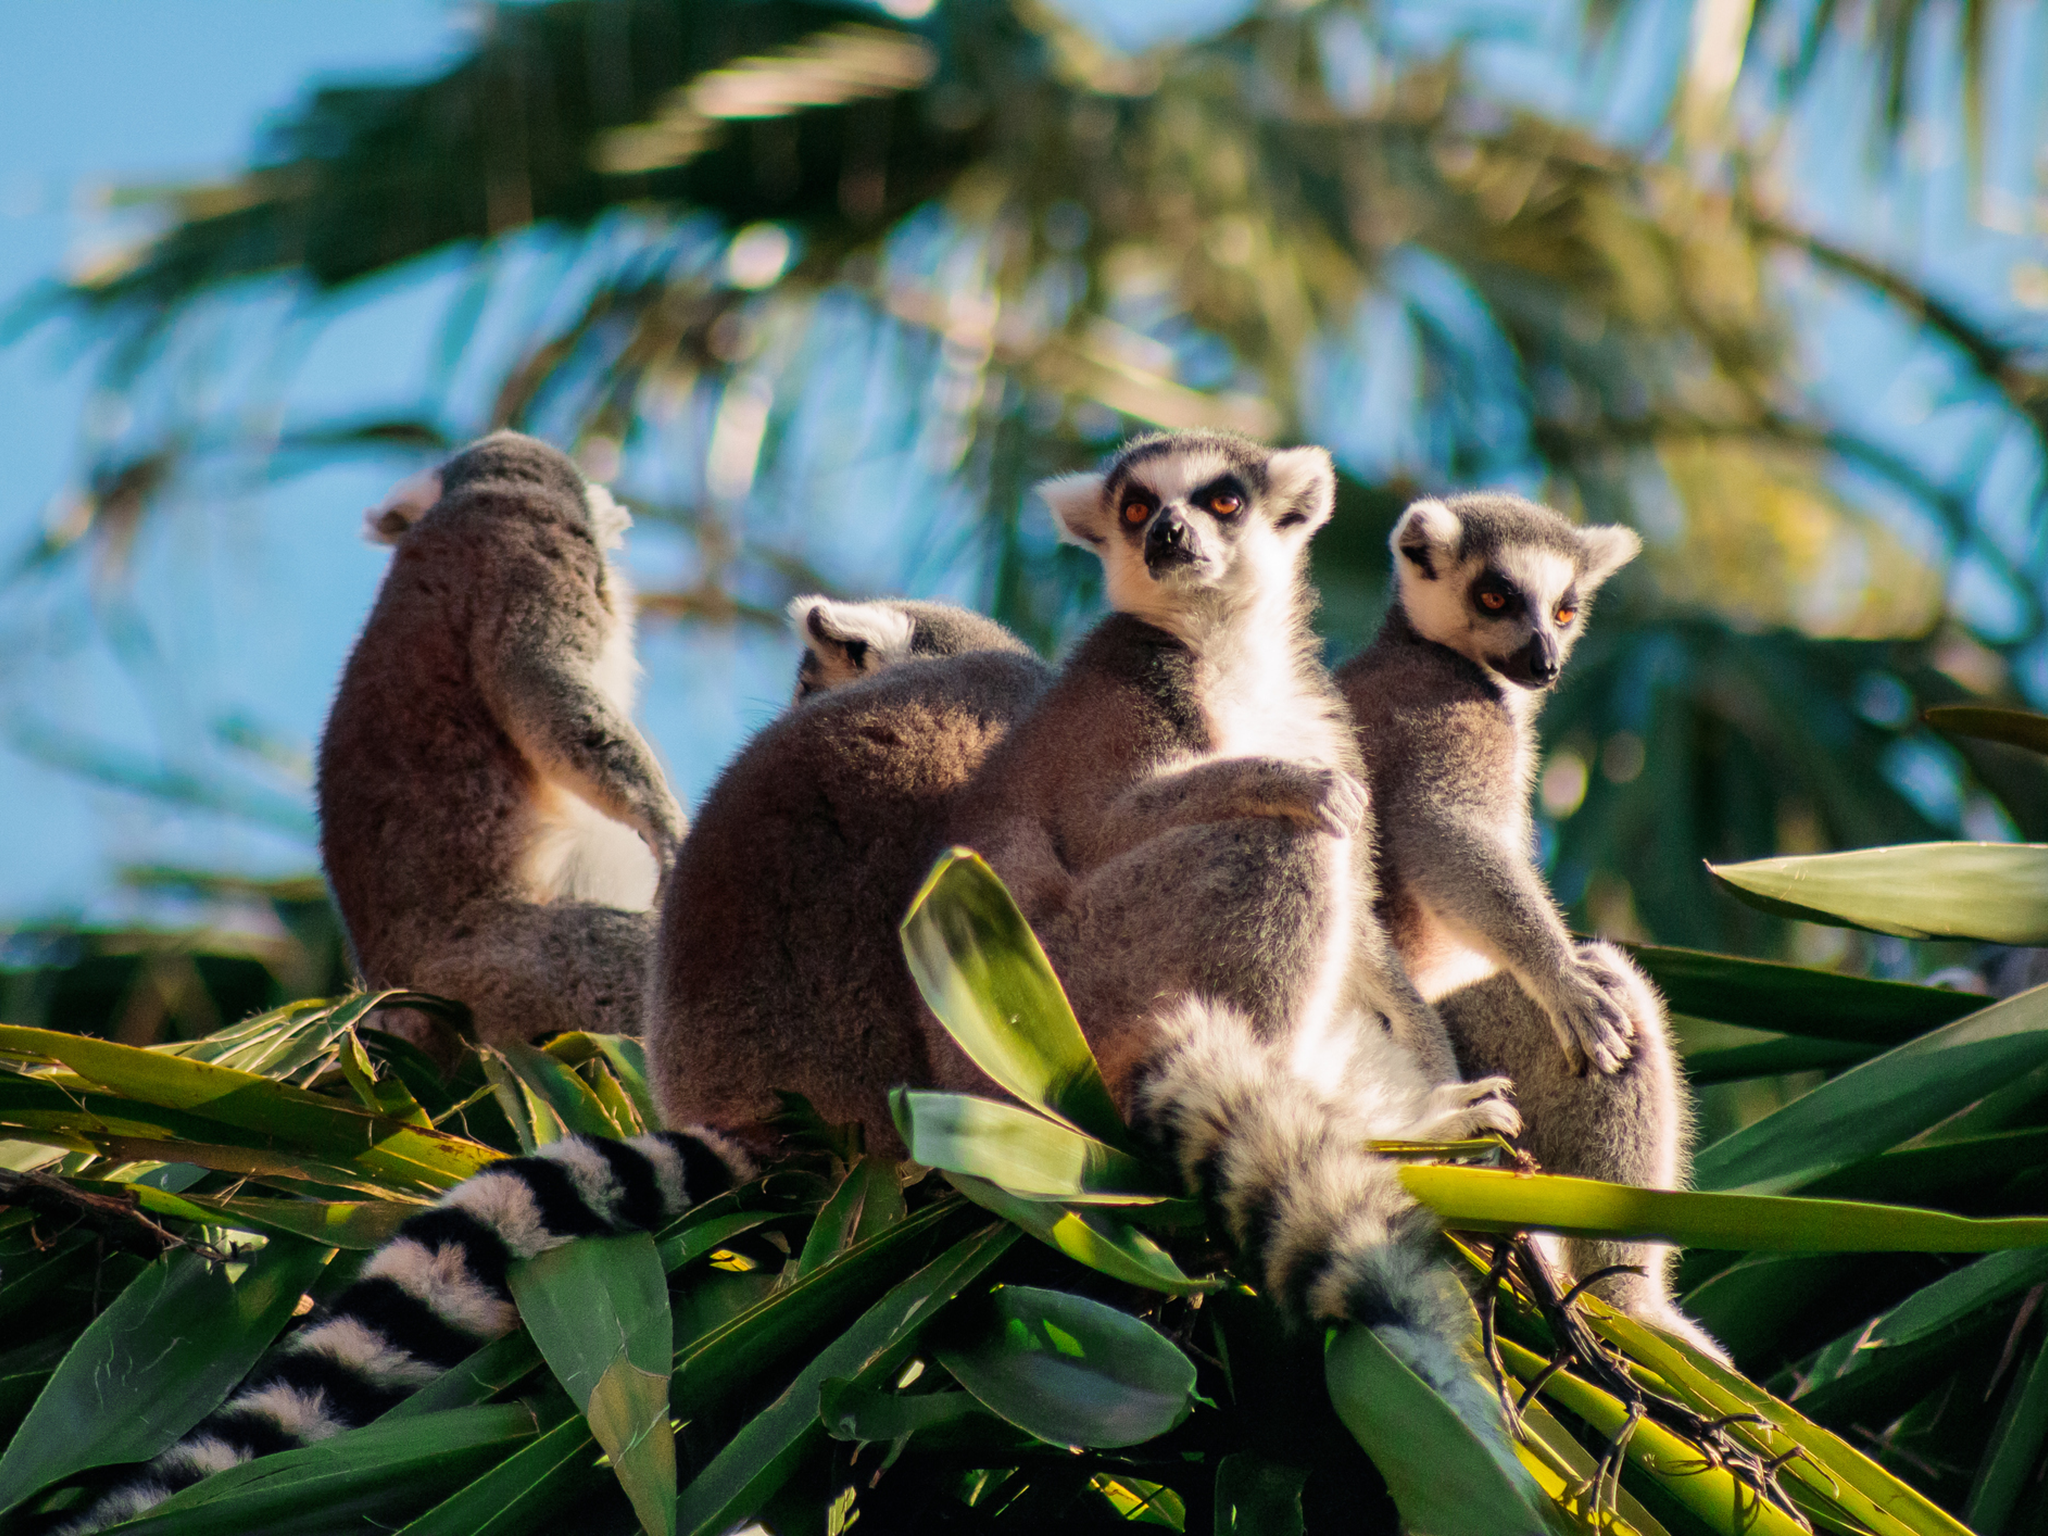 The lemurs, with their foxy faces and fluffy fur, may be the island’s biggest selling point